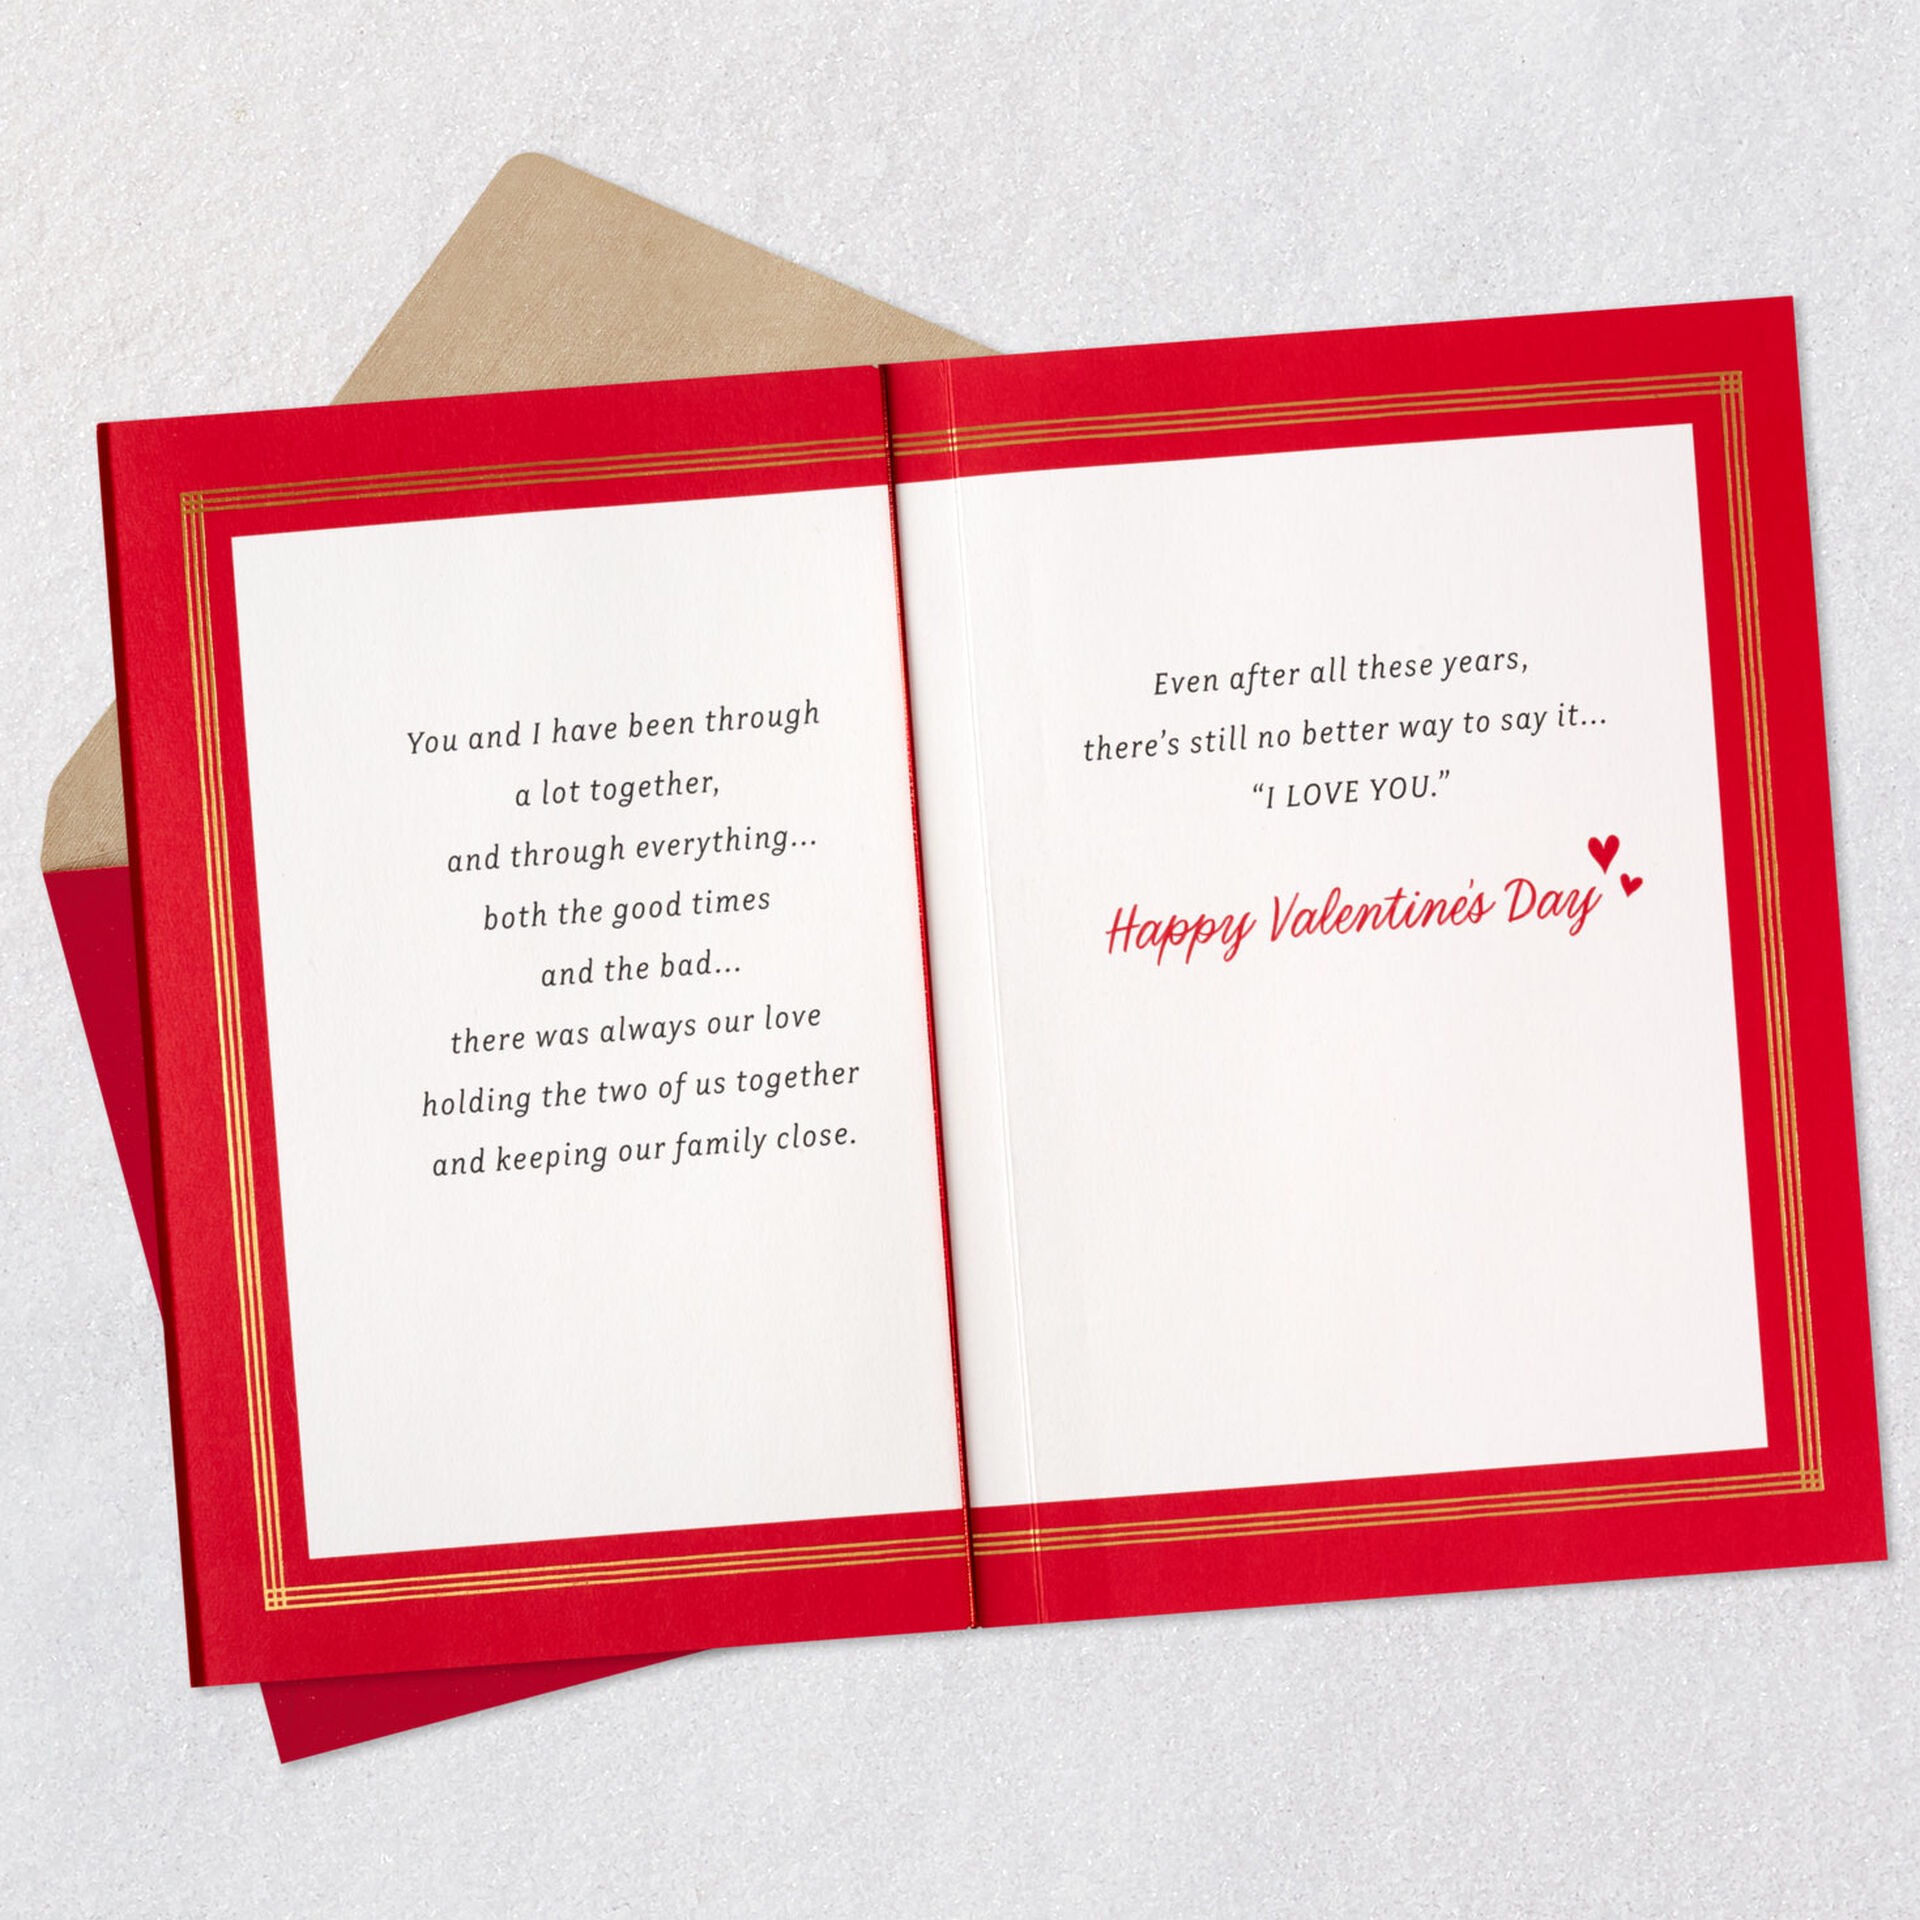 Couple-on-Beach-Husband-Valentines-Day-Card_599VEE7596_04